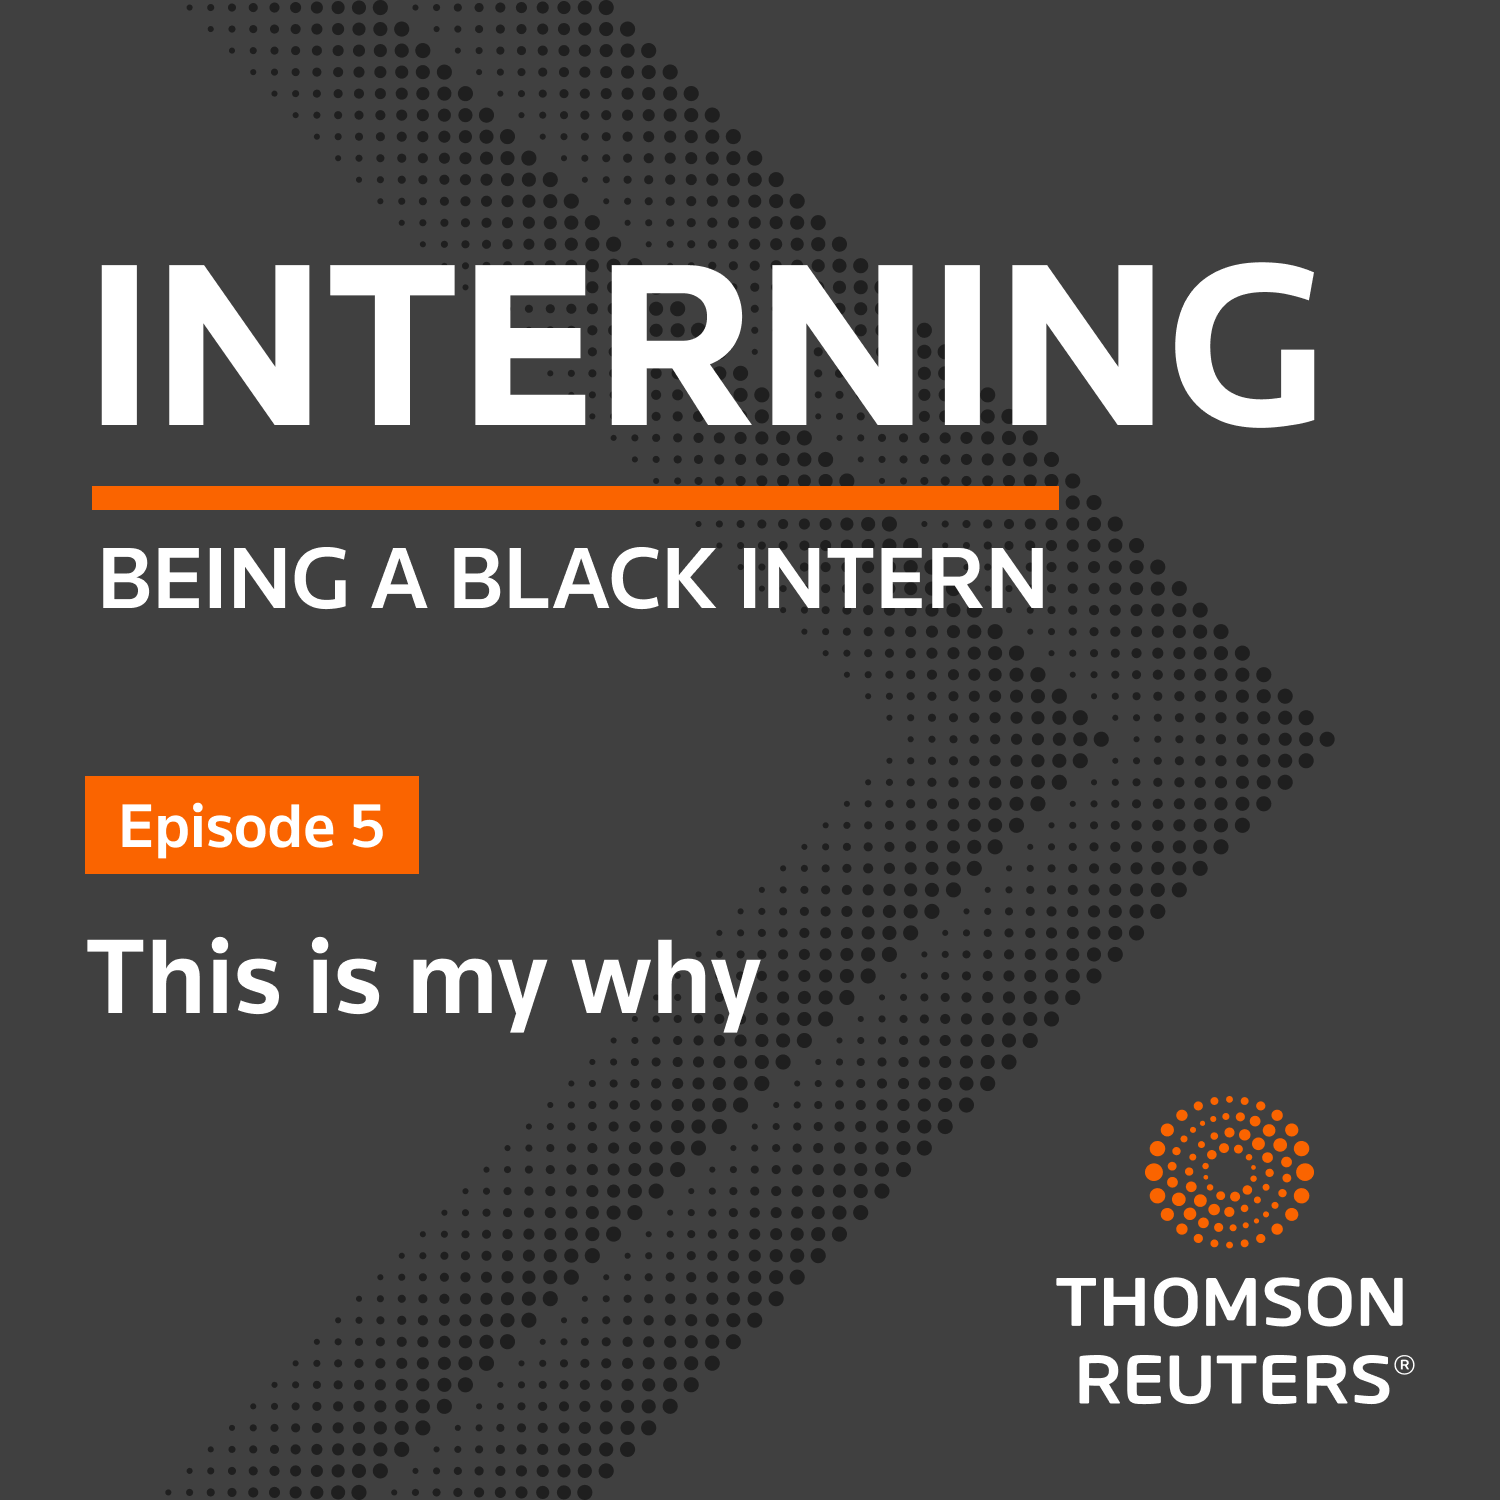 Interning podcast episode 5: This is my why